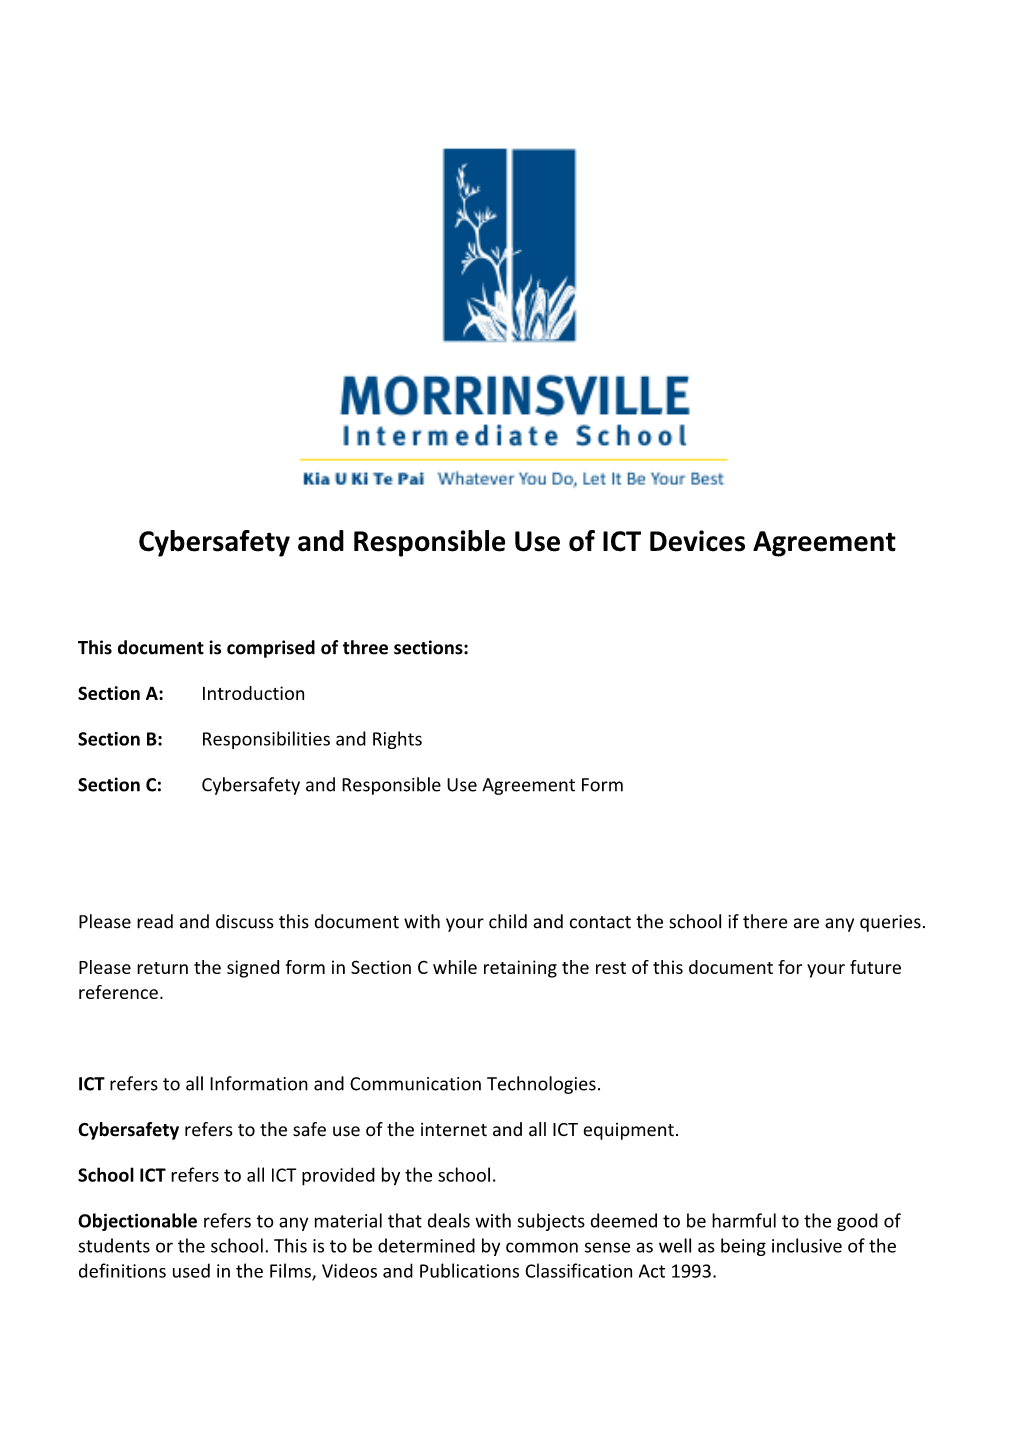 Responsible Use of ICT Devices Agreement